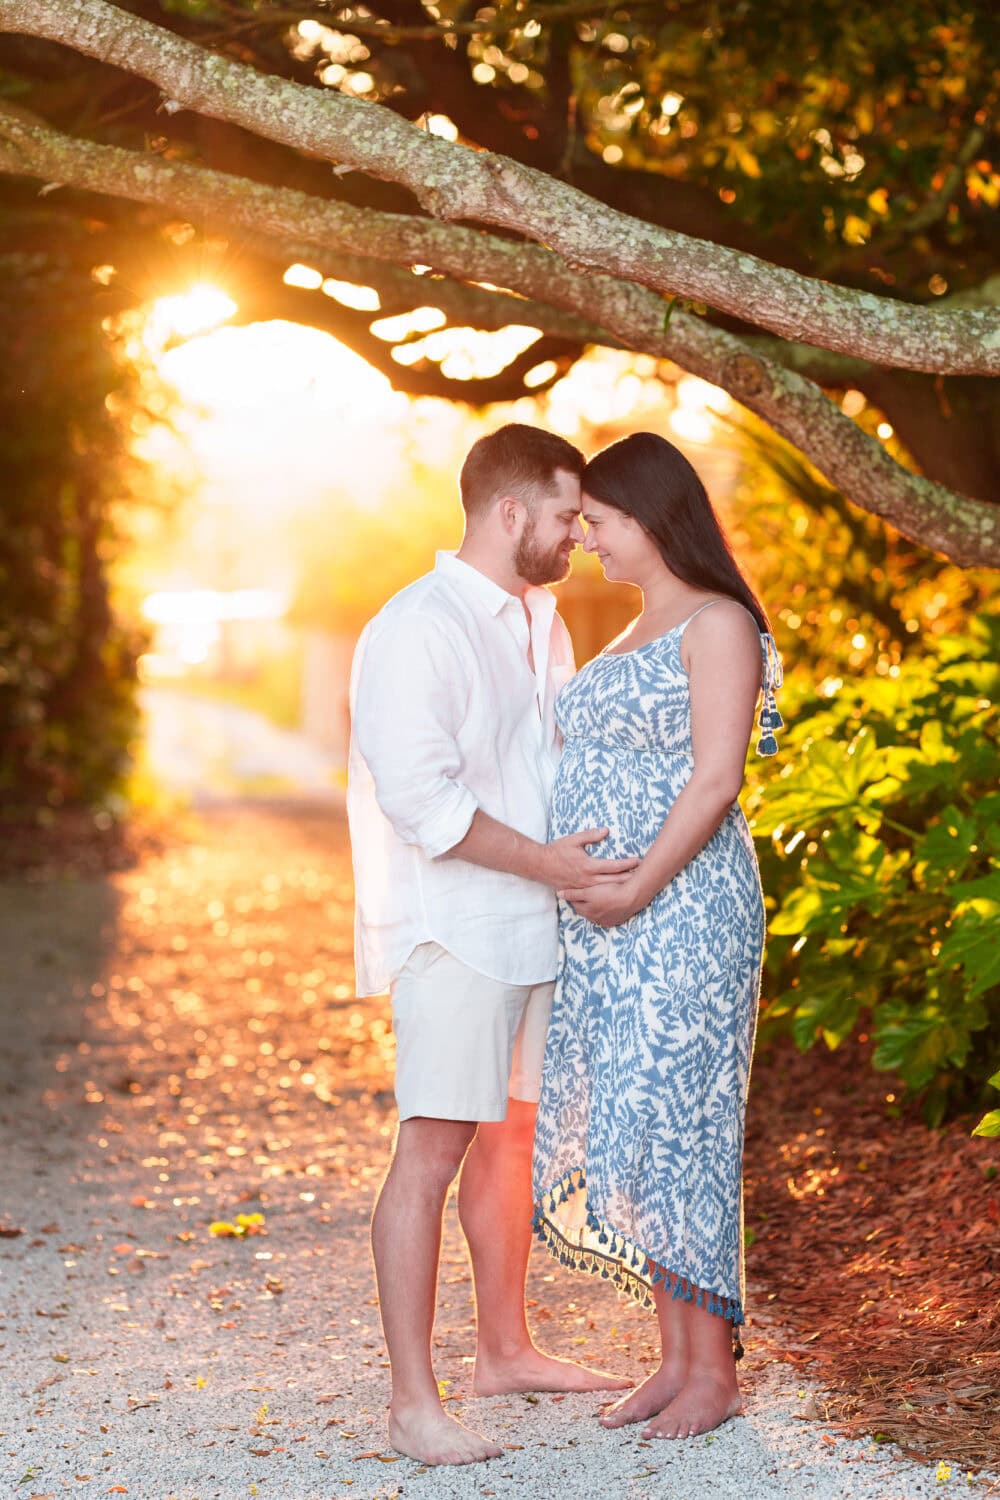 Maternity portrait with sunset peeking out from behind the trees - Pawleys Island